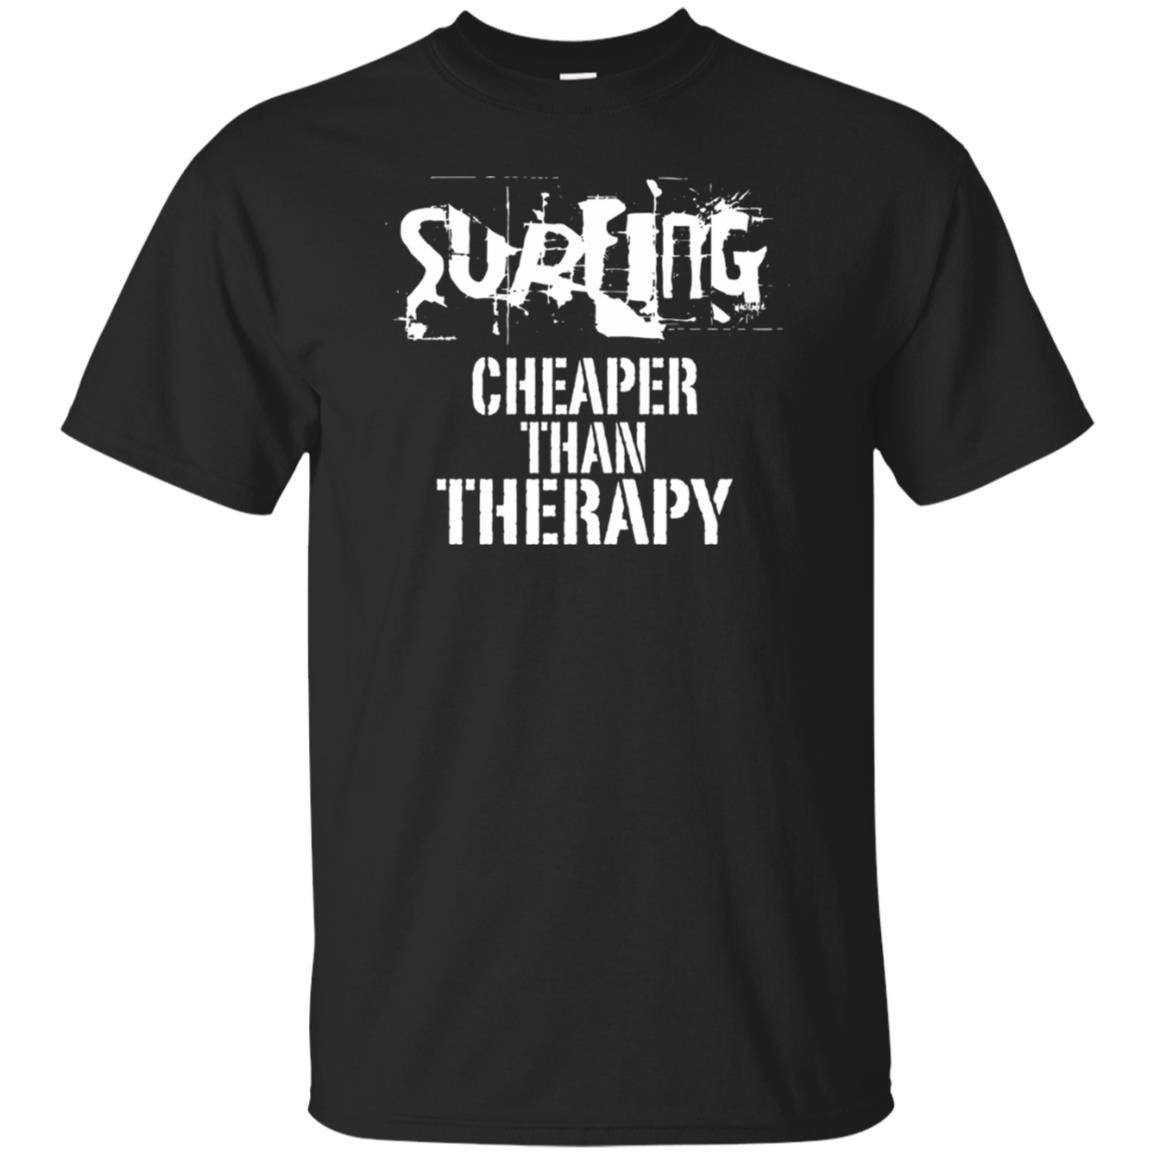 Surfing, Cheaper Than Therapy Shirt